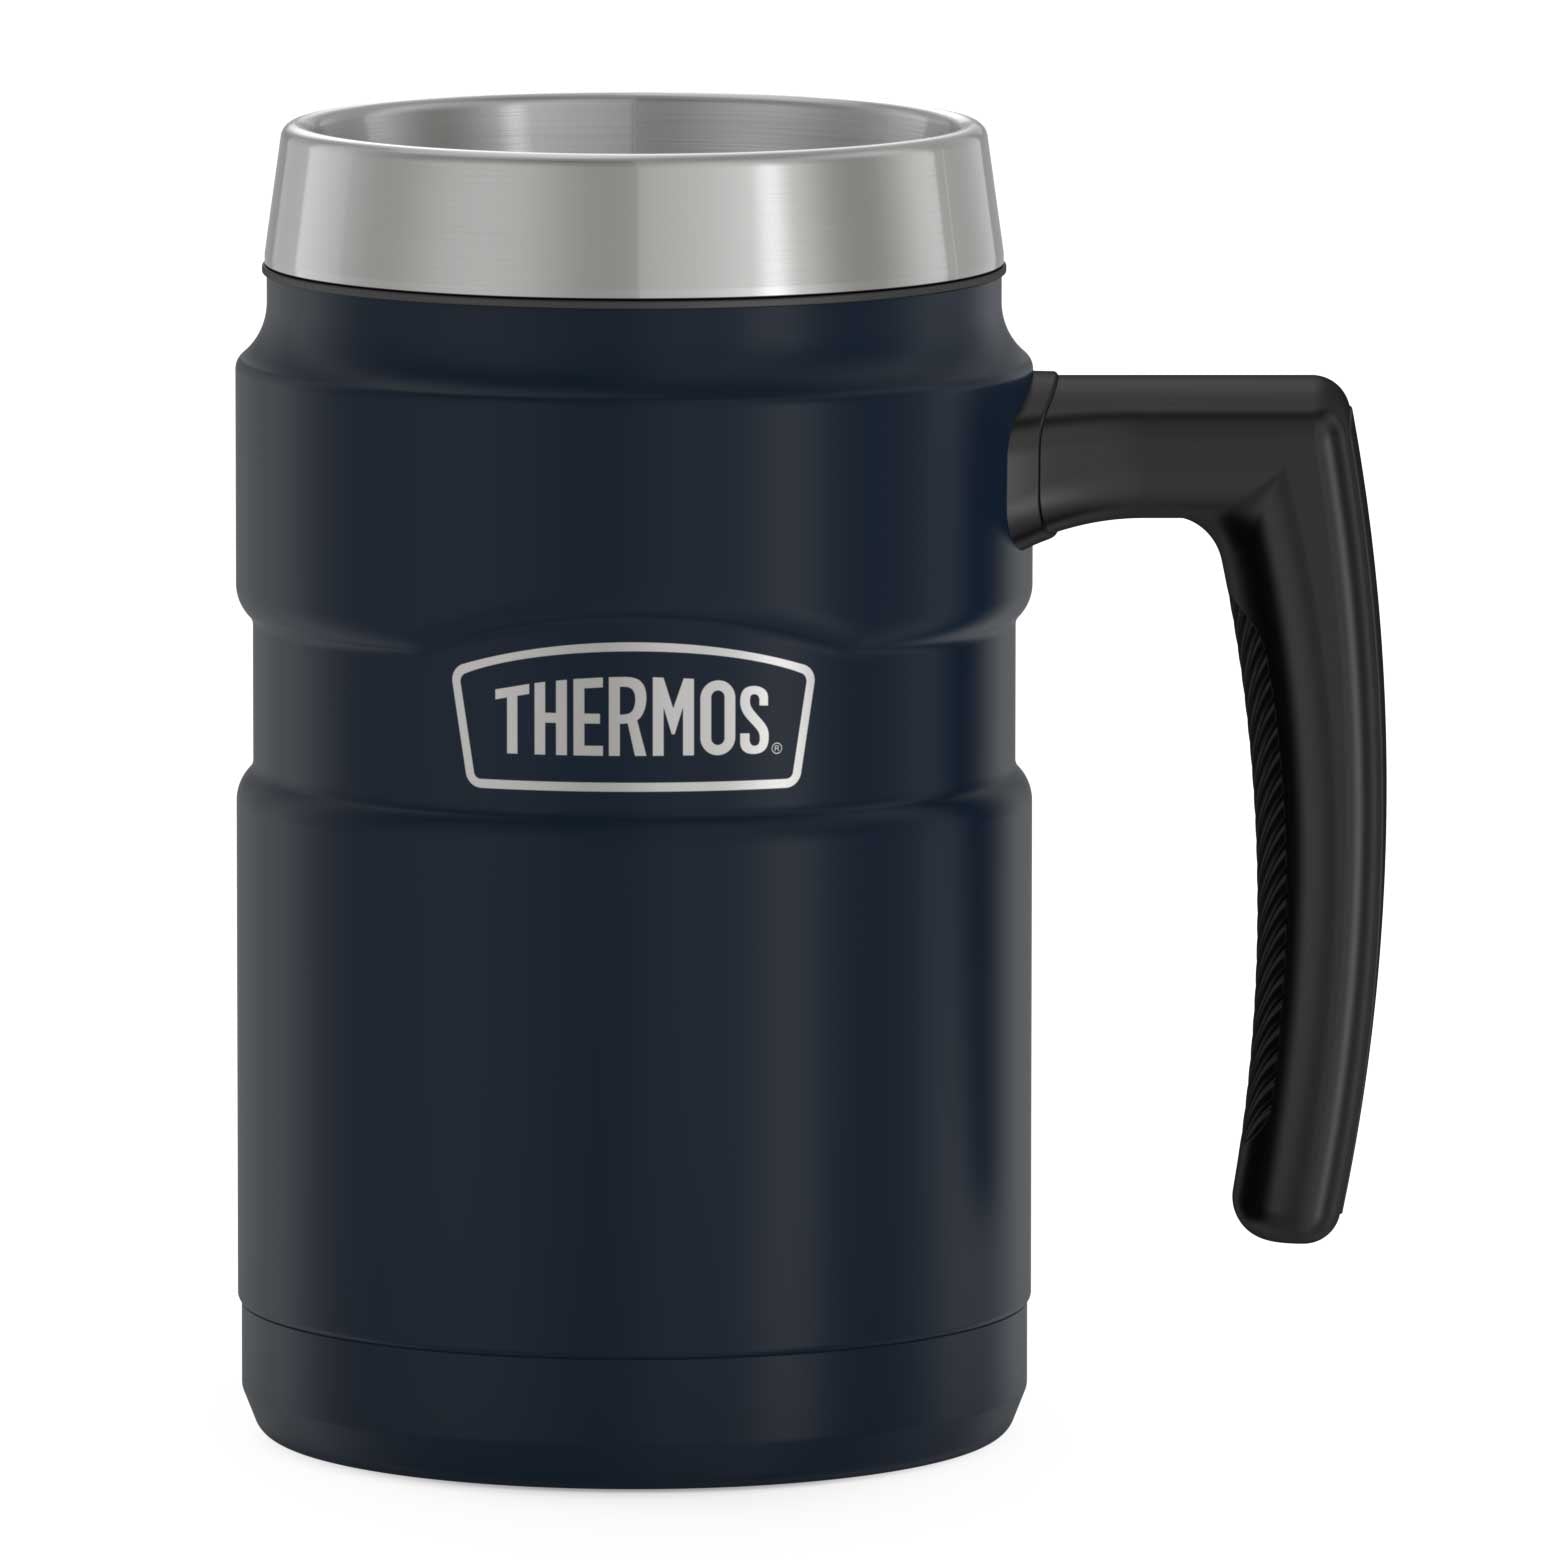 New THERMOS Stainless King S/Steel Vacuum Insulated Travel Mug 470ml with  Handle